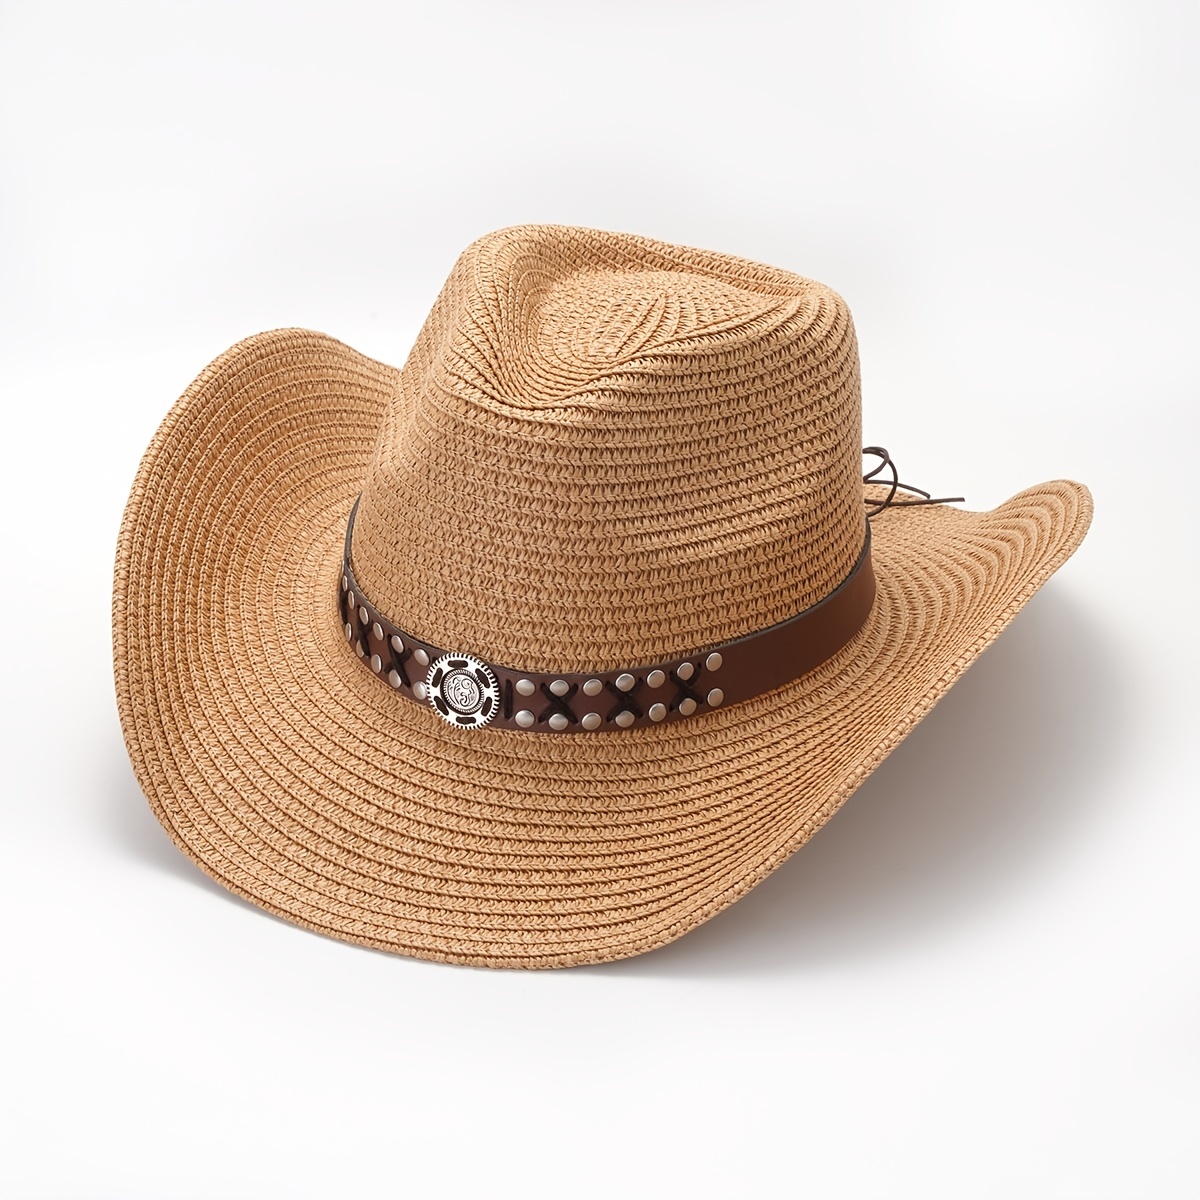 Belt Decor Straw Hat, Sun Visor Travel Fishing Outdoor Cowboy Hats, Vintage Casual Hair Accessories For Women